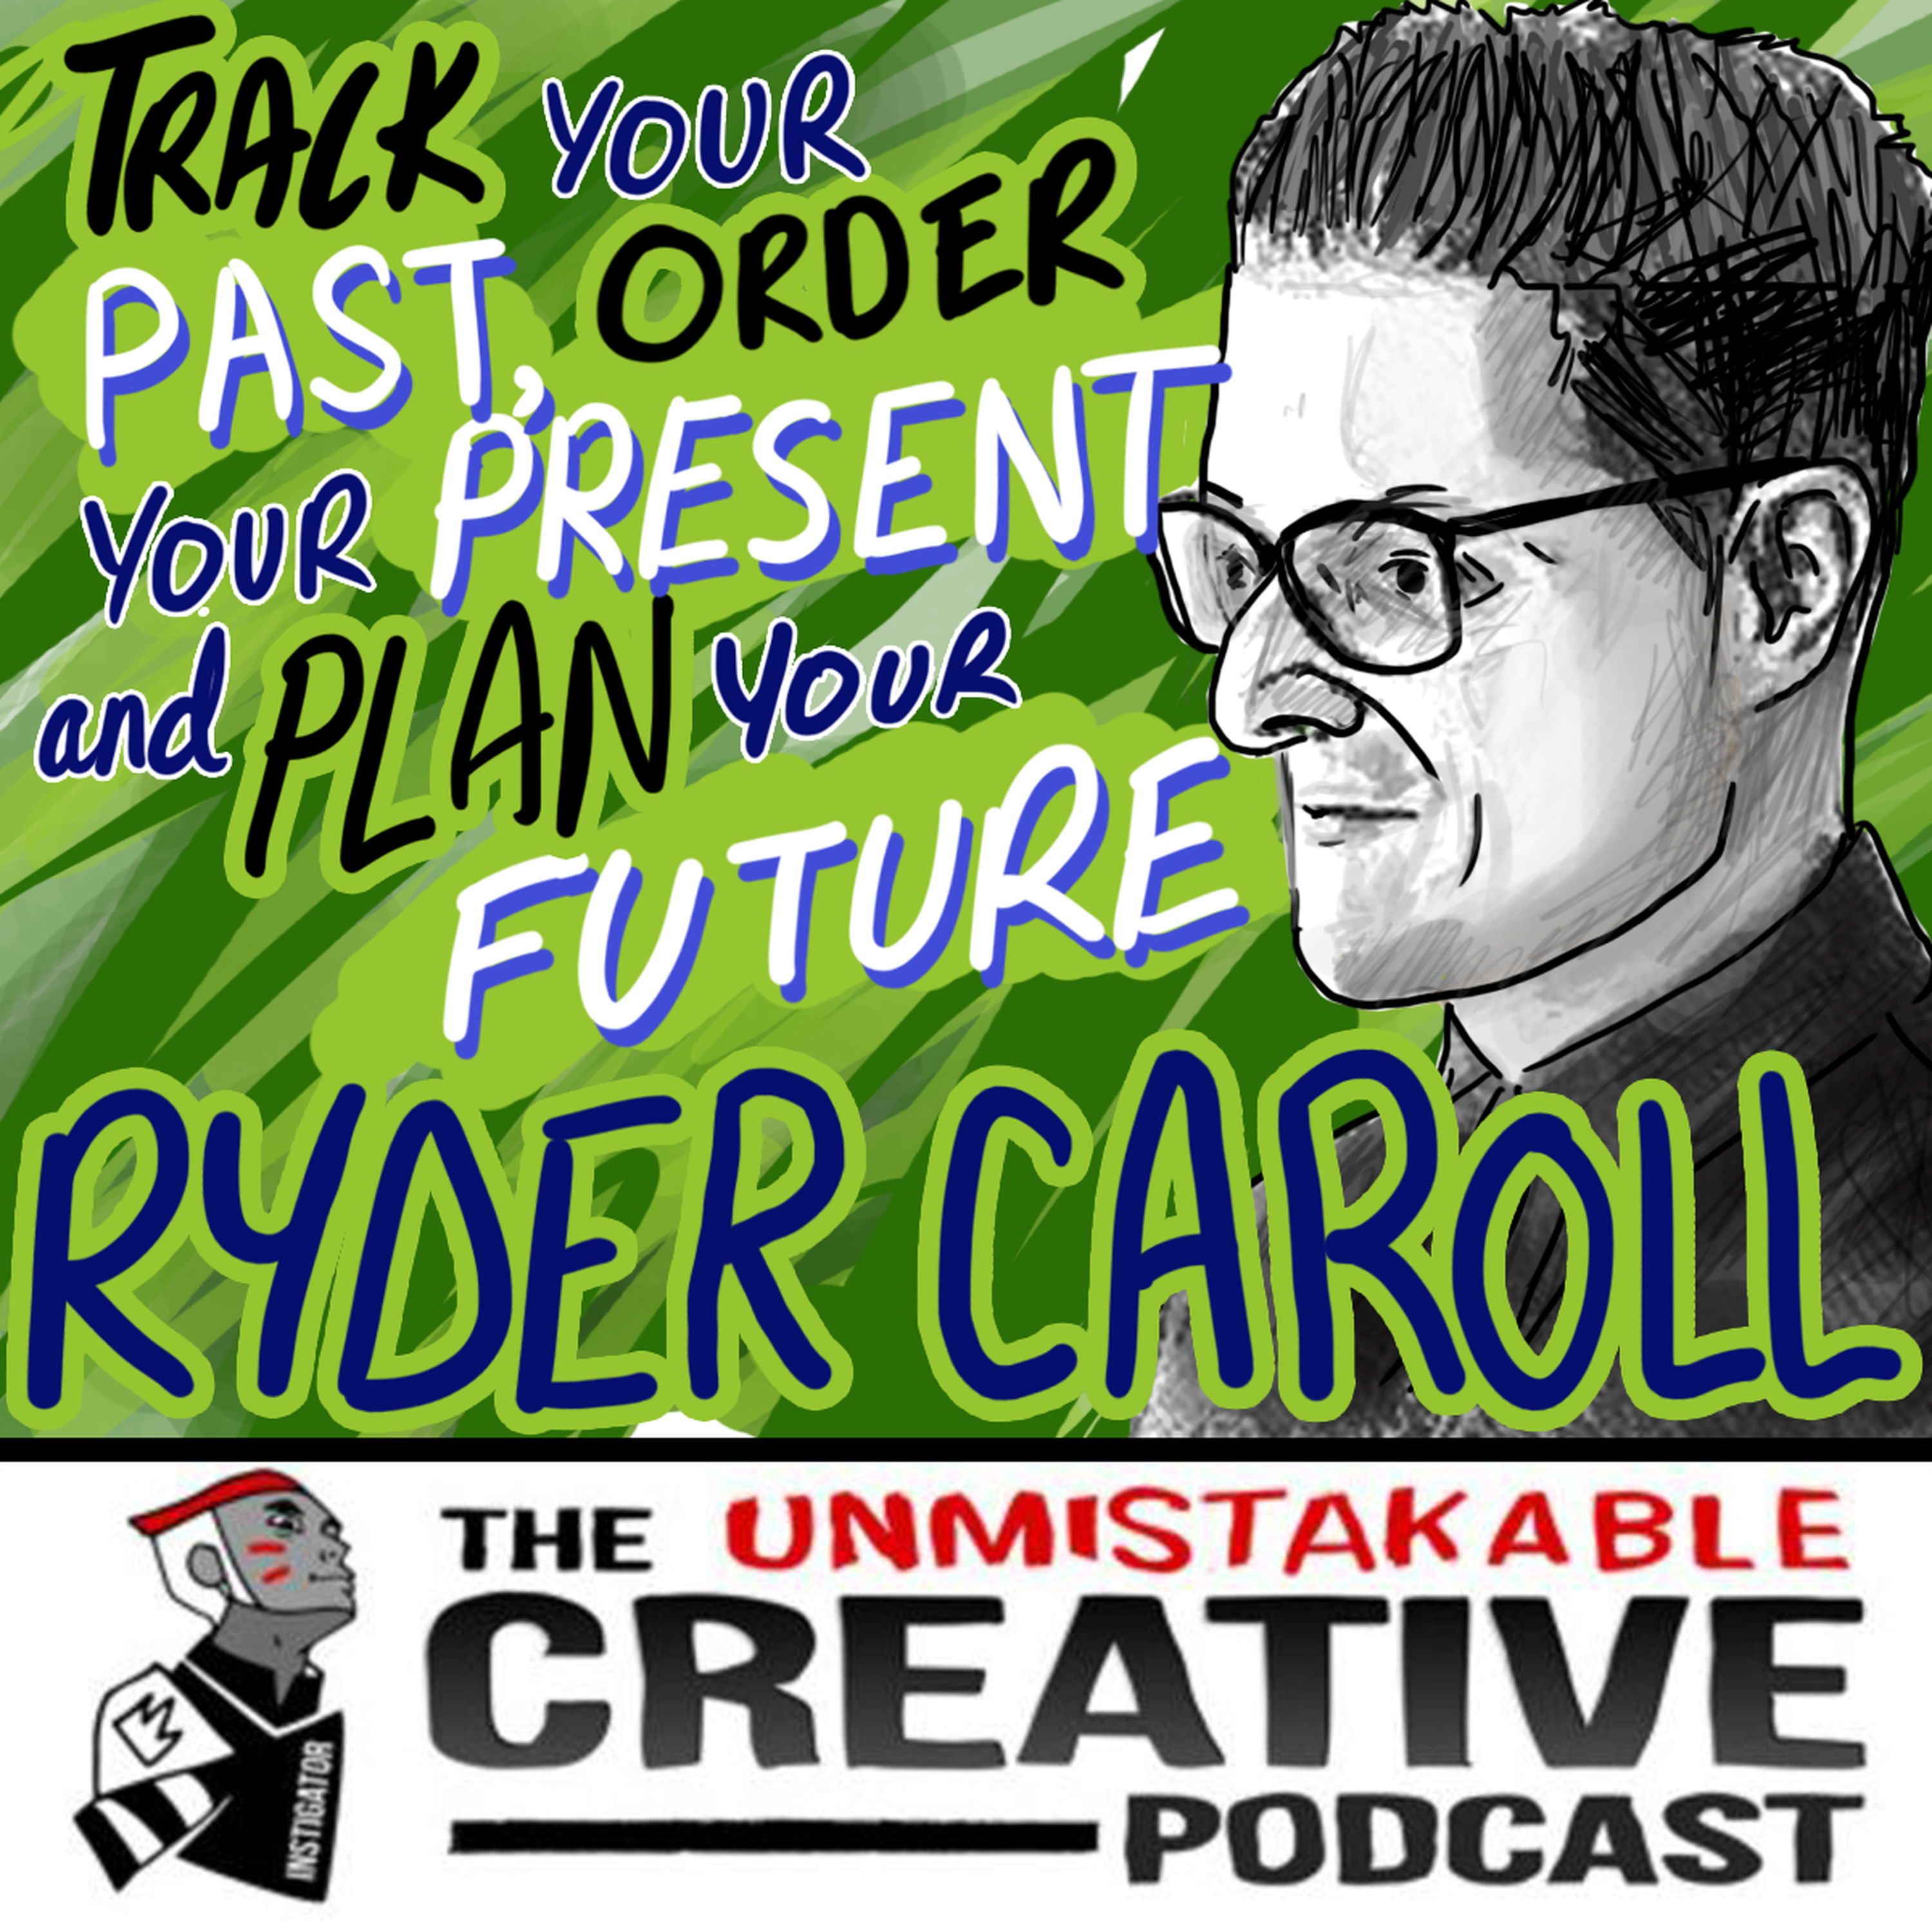 Track Your Past, Order Your Present, and Plan Your Future with Ryder Carroll Image